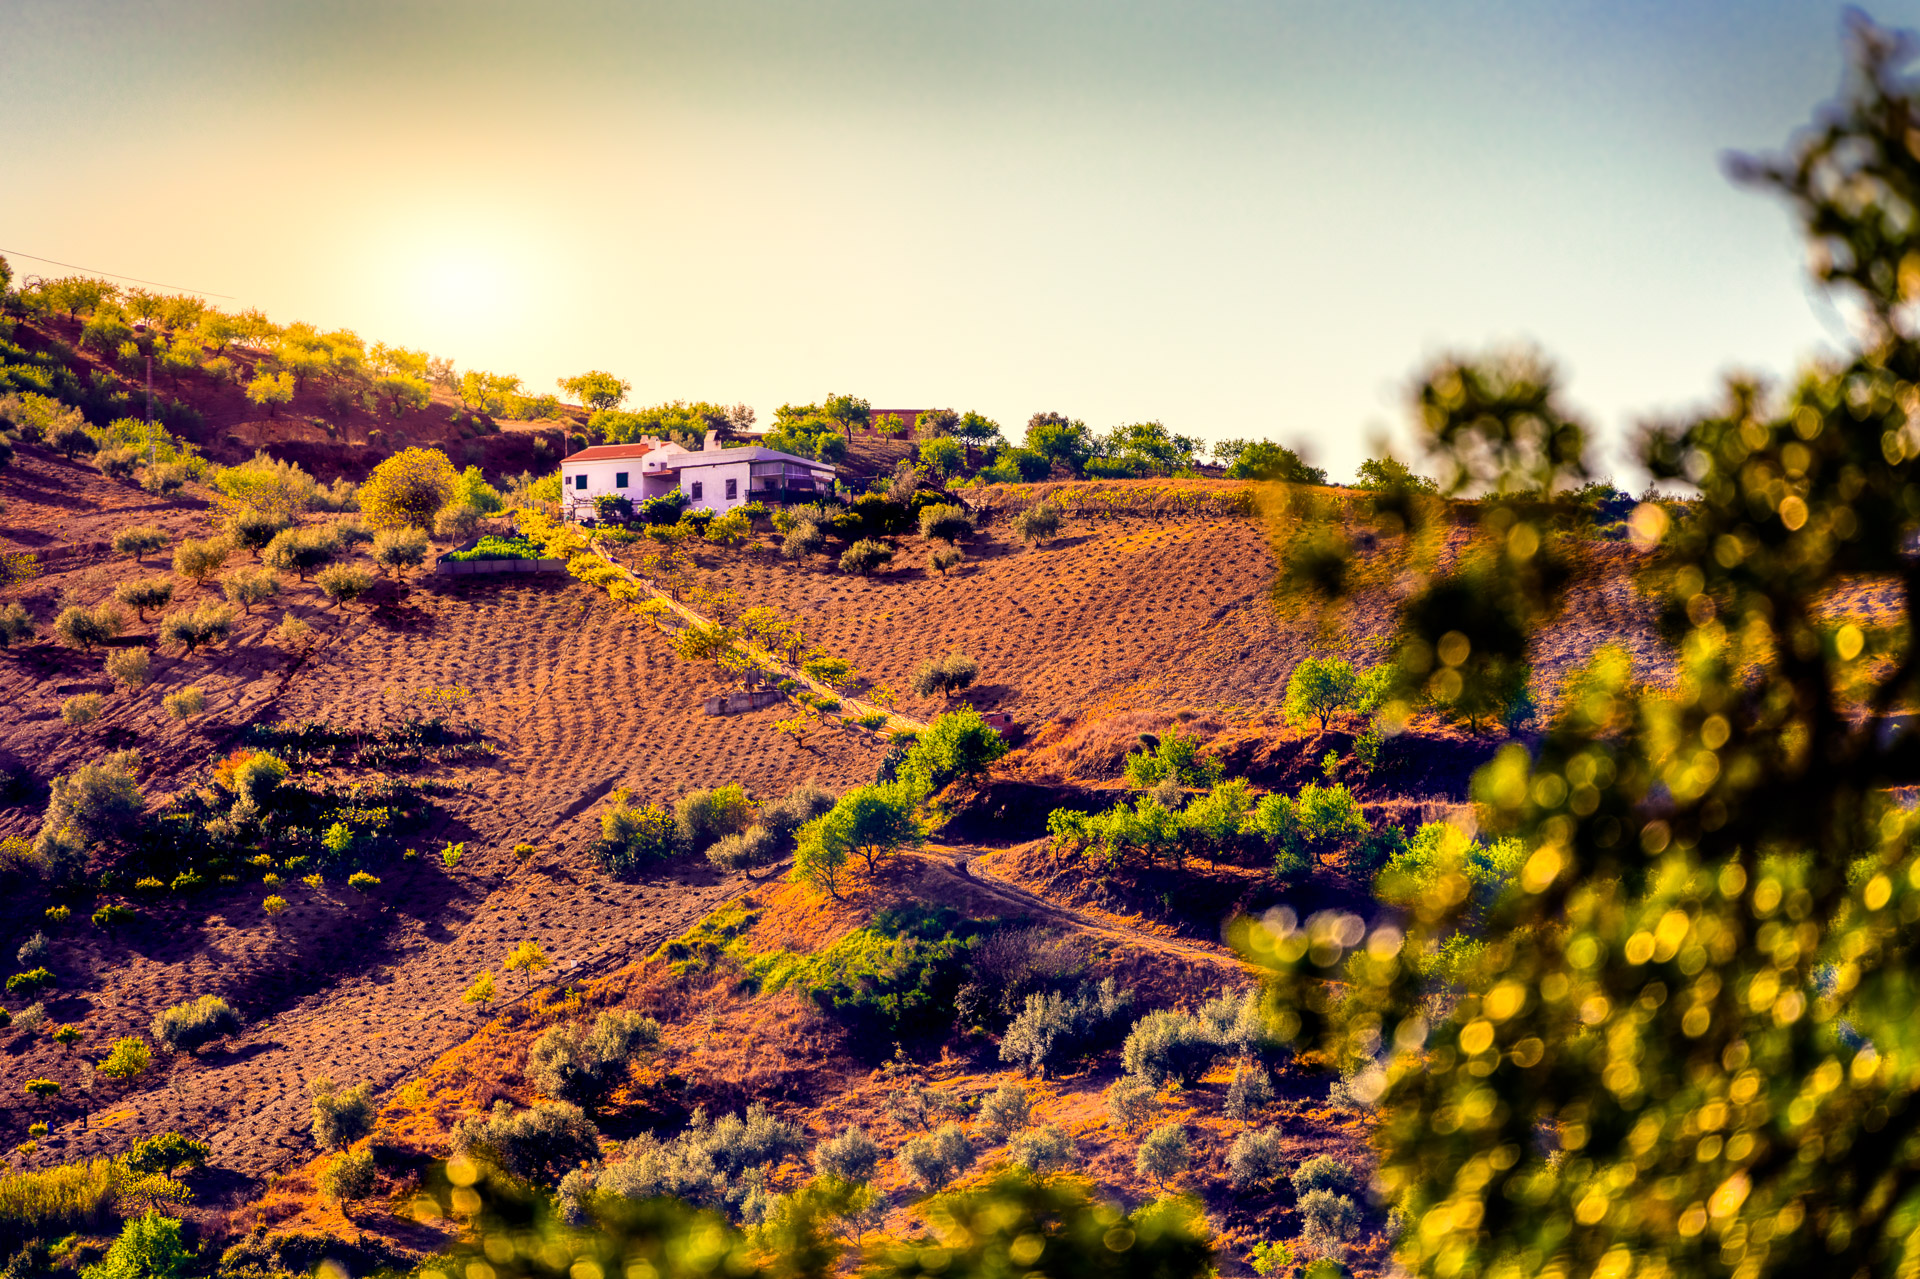 Traditional Finca in the Mountains of Andalucia, Spain.

Tags: Finca, Andalucia, Spain, Malaga, mountain, landscape